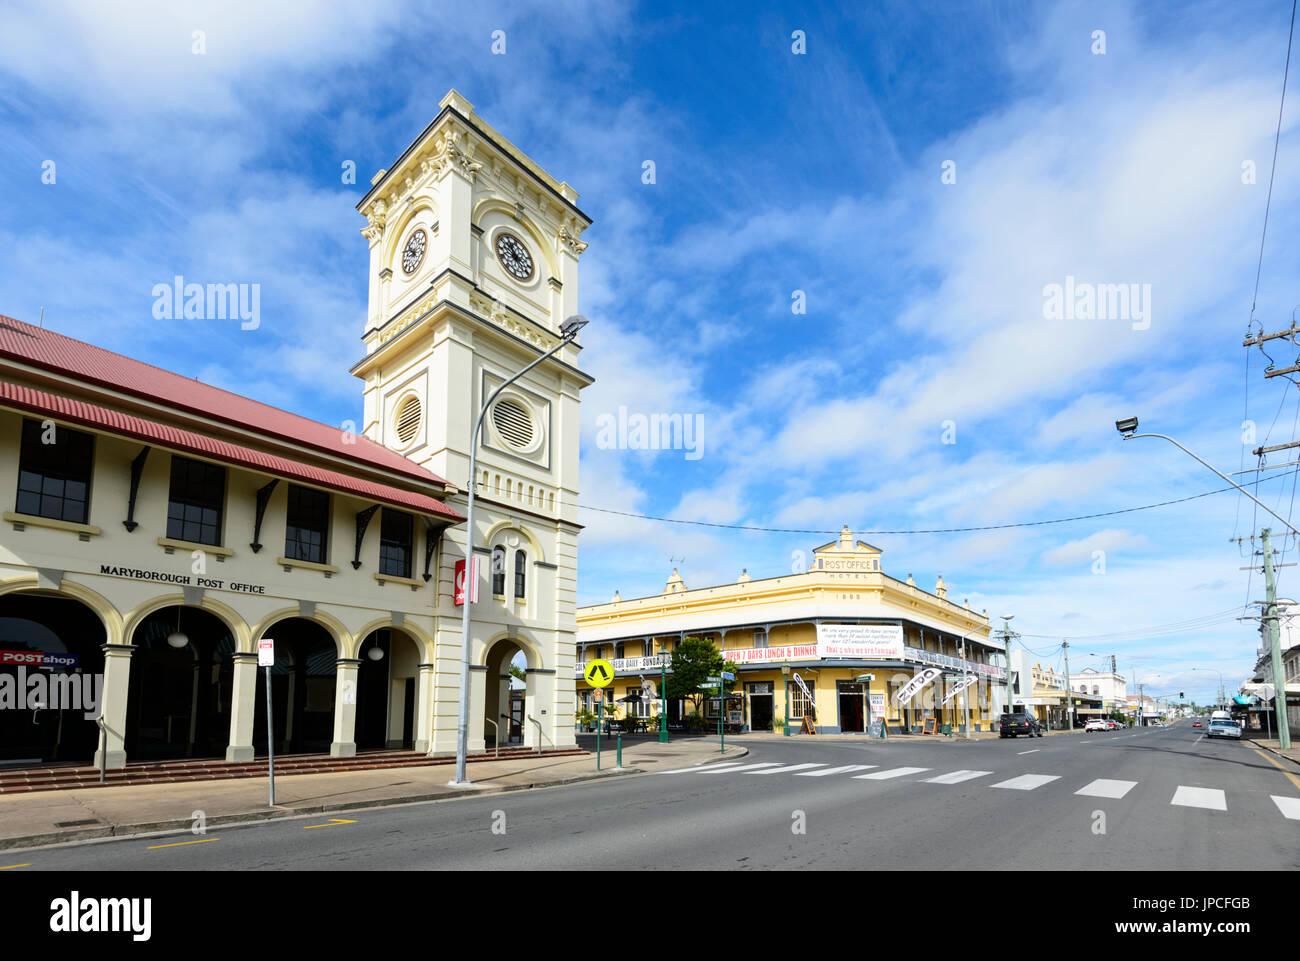 Post Office building and Historic Post Office Hotel, built in 1889, Wharf Street, Heritage Precinct, Maryborough, Queensland, QLD, Australia Stock Photo